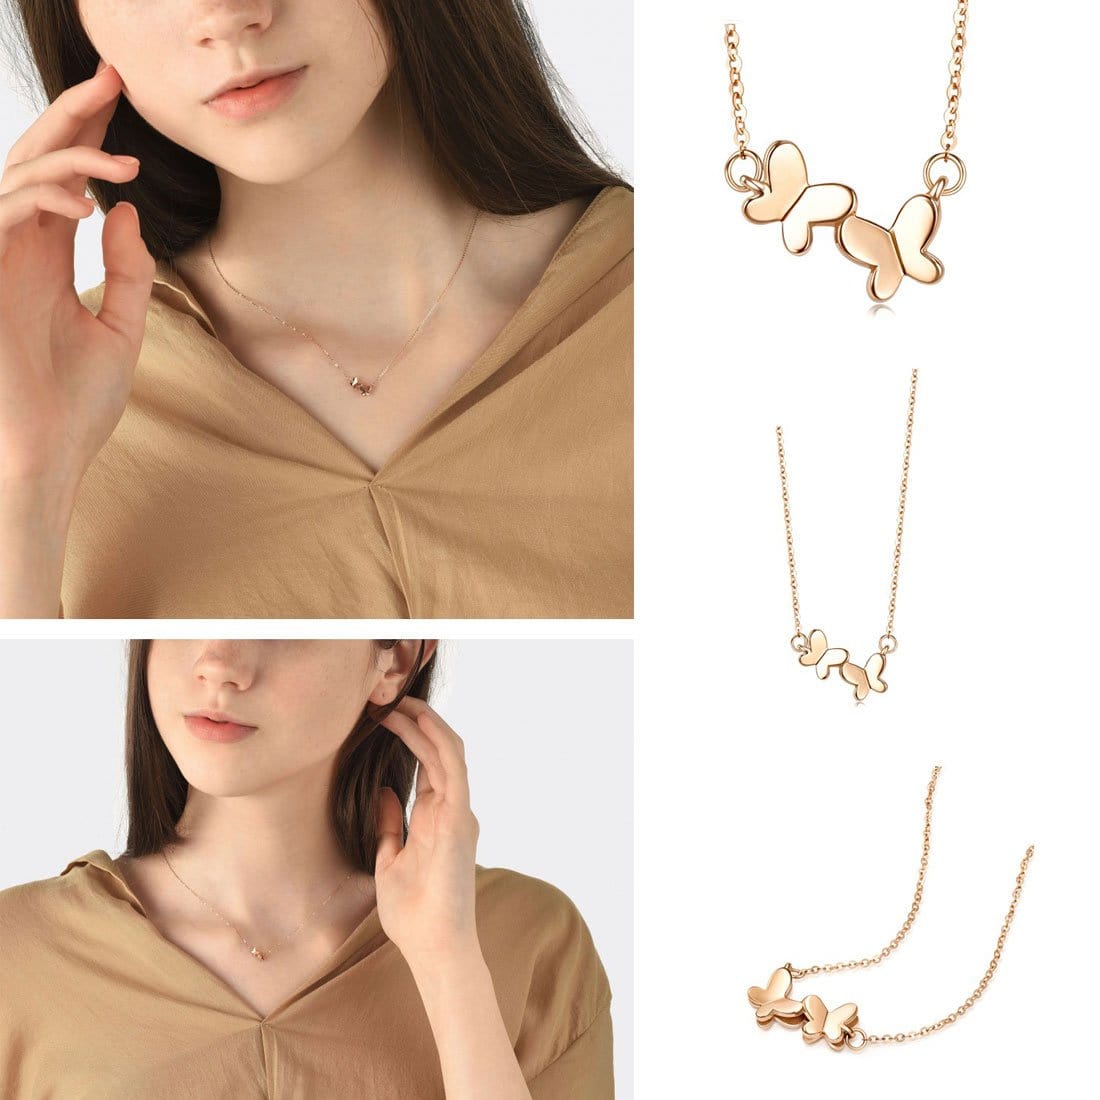 Fanci "Charming Dance" Delicate Butterfly 14K Yellow Gold Necklace Show